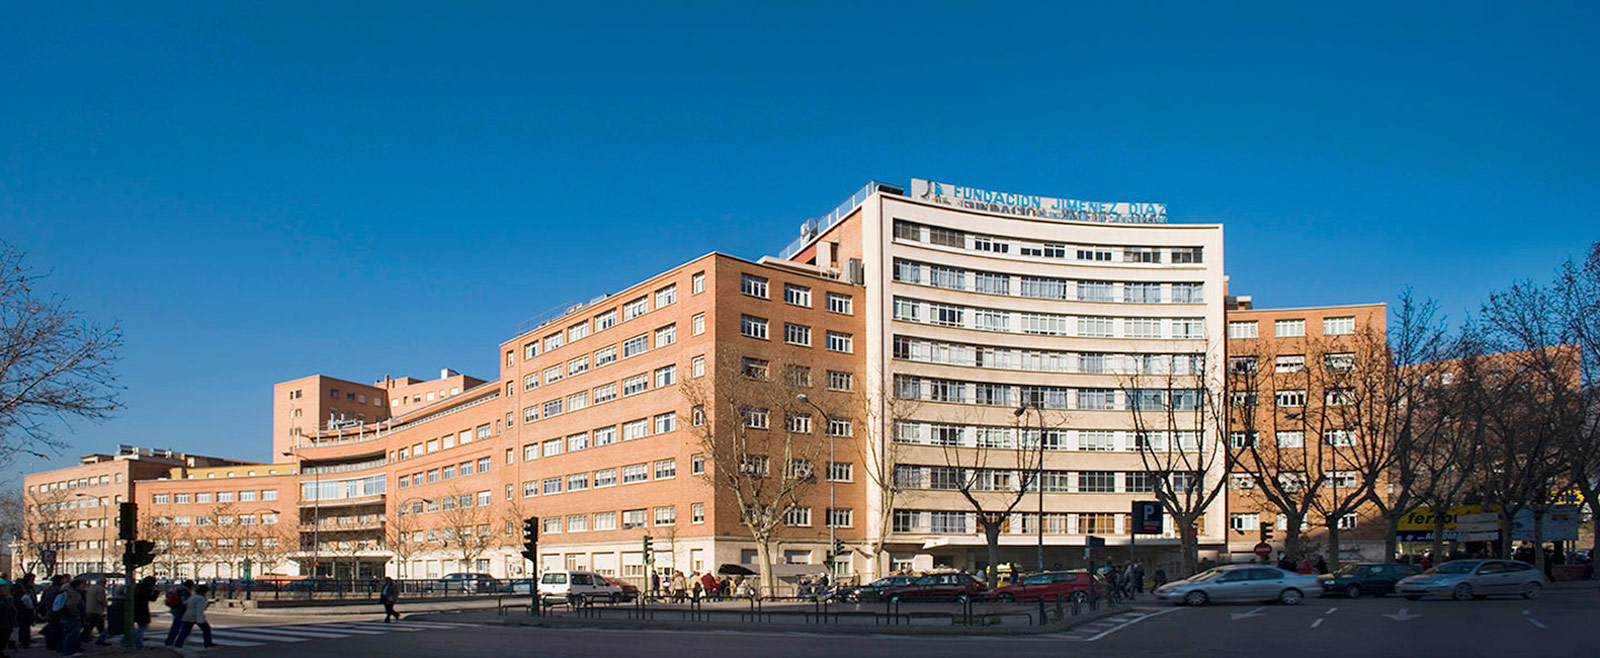 In 2023, and for the eighth consecutive year, the Jiménez Díaz Foundation has been recognized as the best hospital in Spain according to the IEH 2023